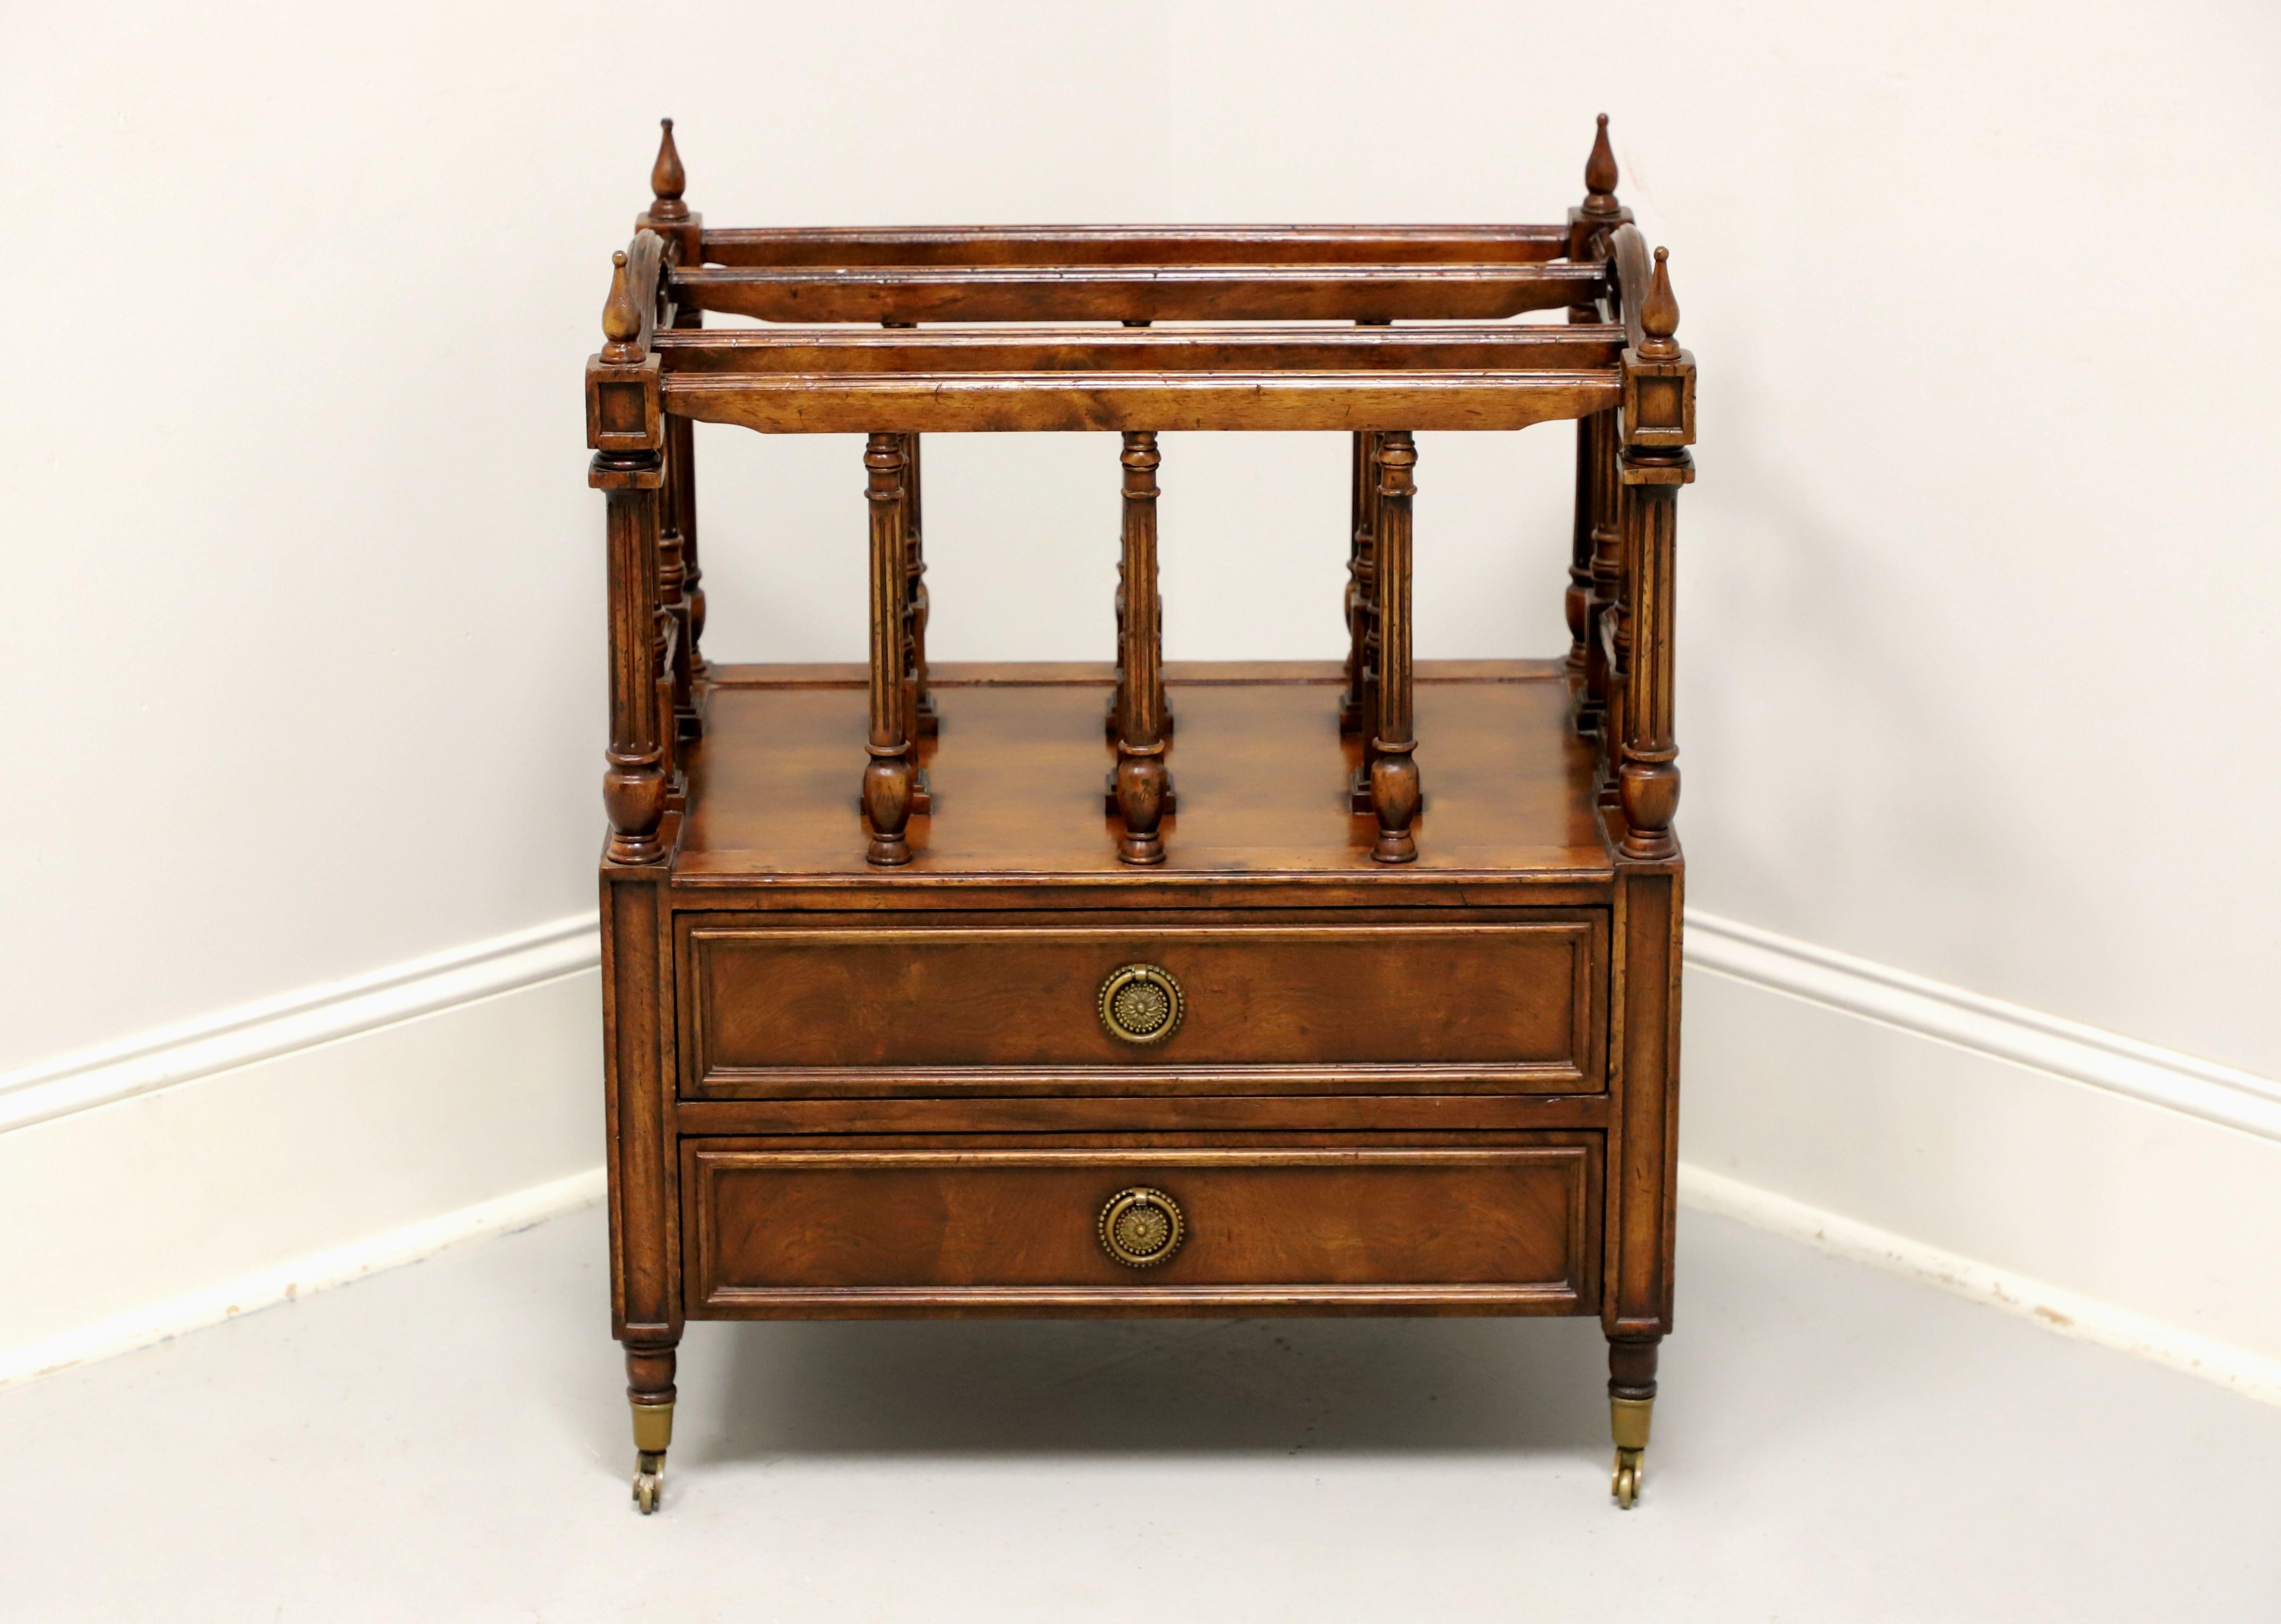 A Canterbury magazine rack in the Regency style, unbranded. Solid walnut with brass hardware, open handles, decorative turned dividers, knob finials at four corners, turned side posts, solid drawer base, and on brass casters. Features three holding